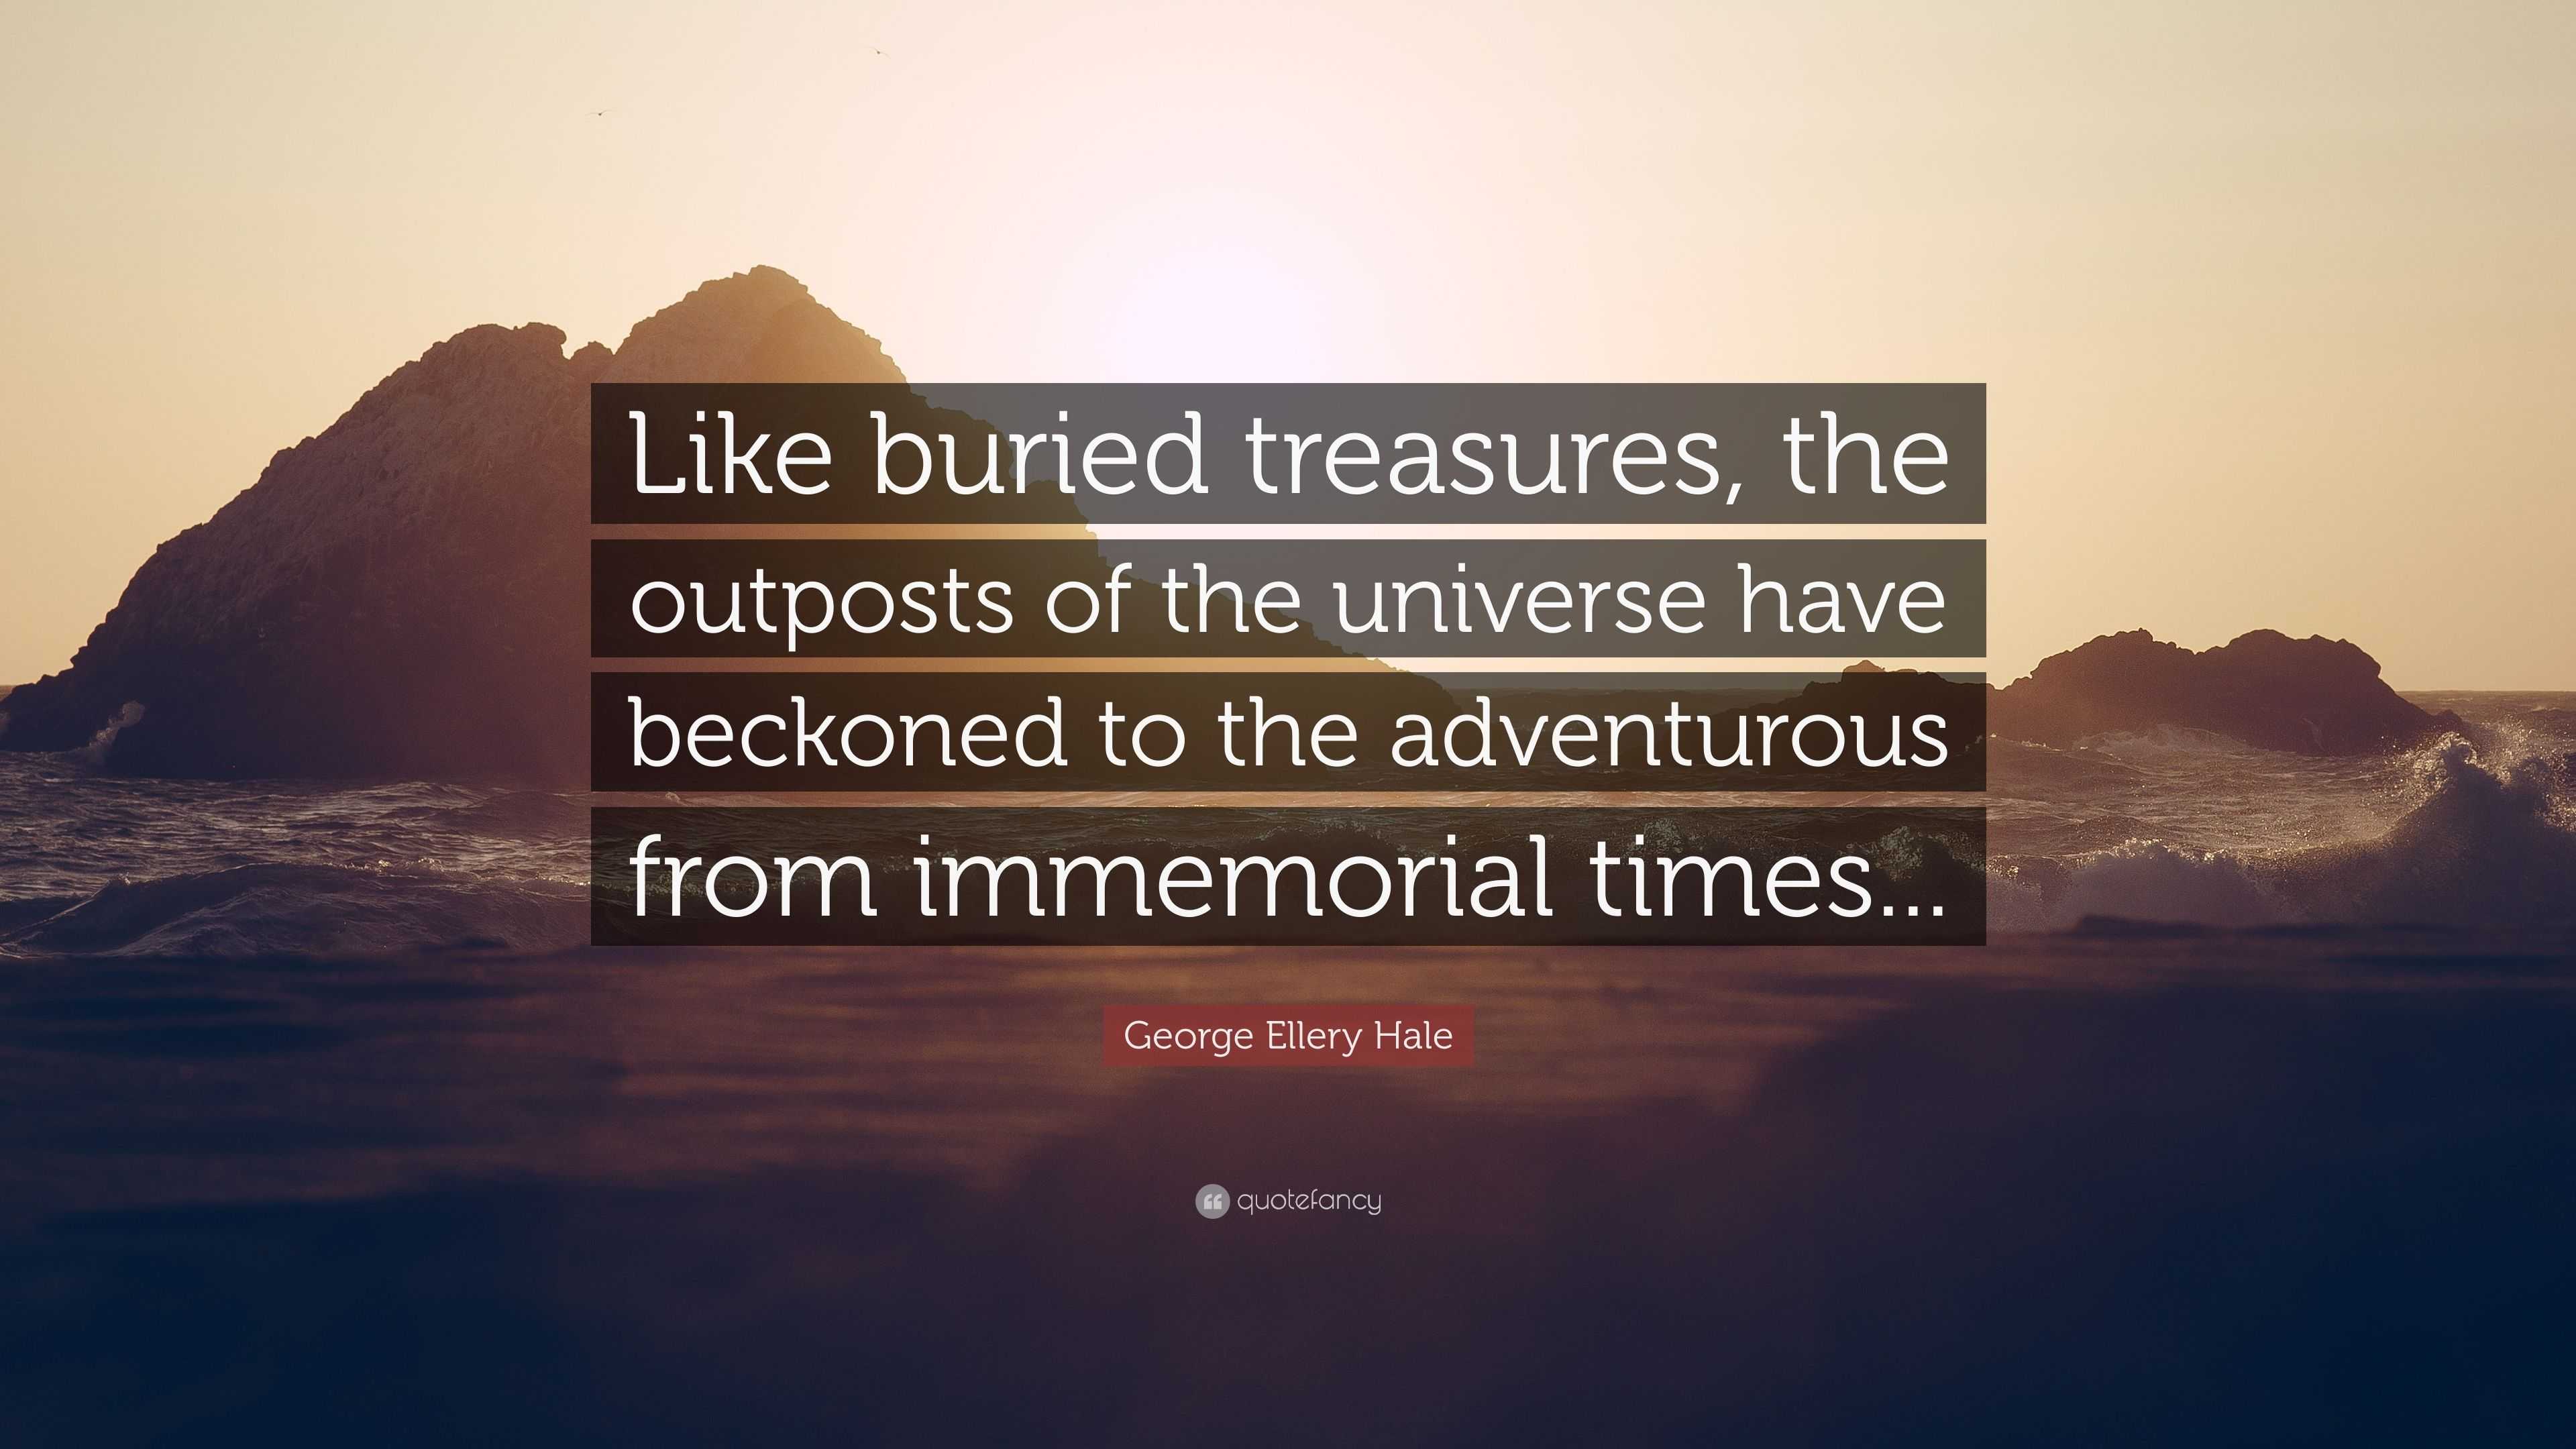 George Ellery Hale Quote: “Like buried treasures, the outposts of the ...